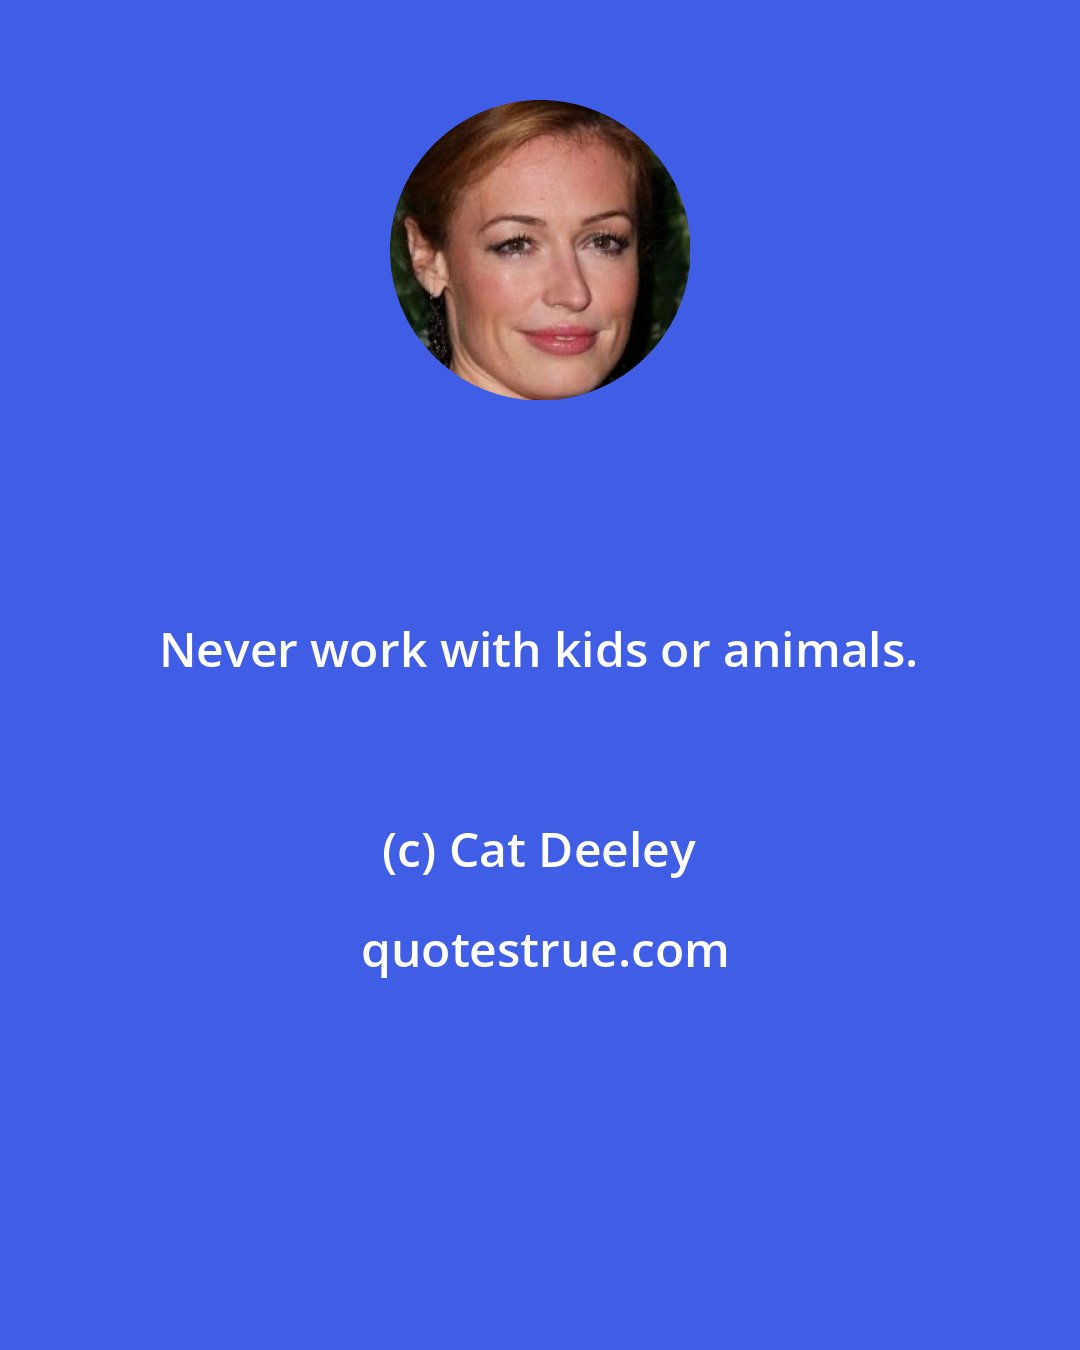 Cat Deeley: Never work with kids or animals.